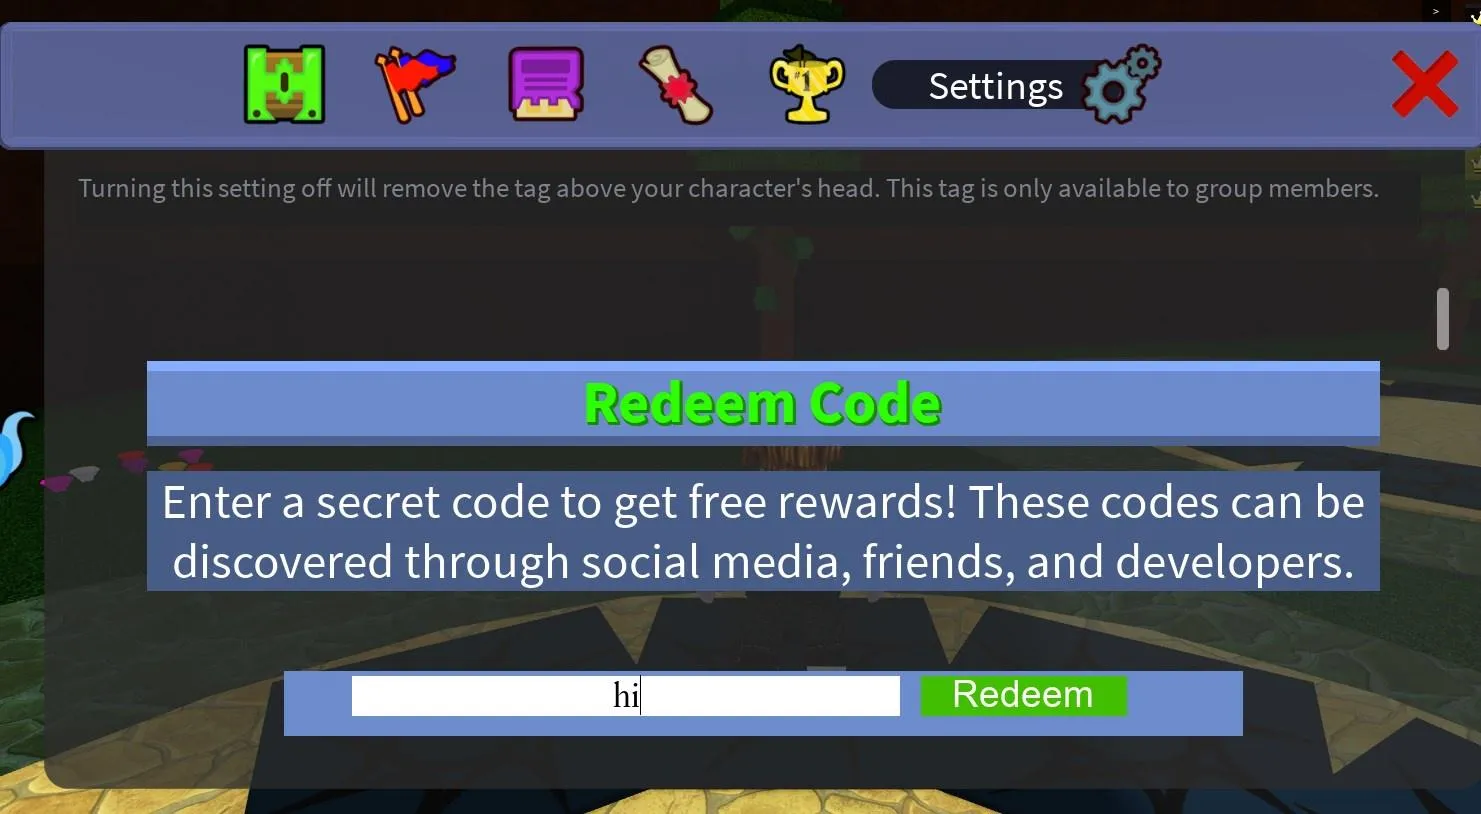 How TO Redeem a Code in Build a boat for treasure